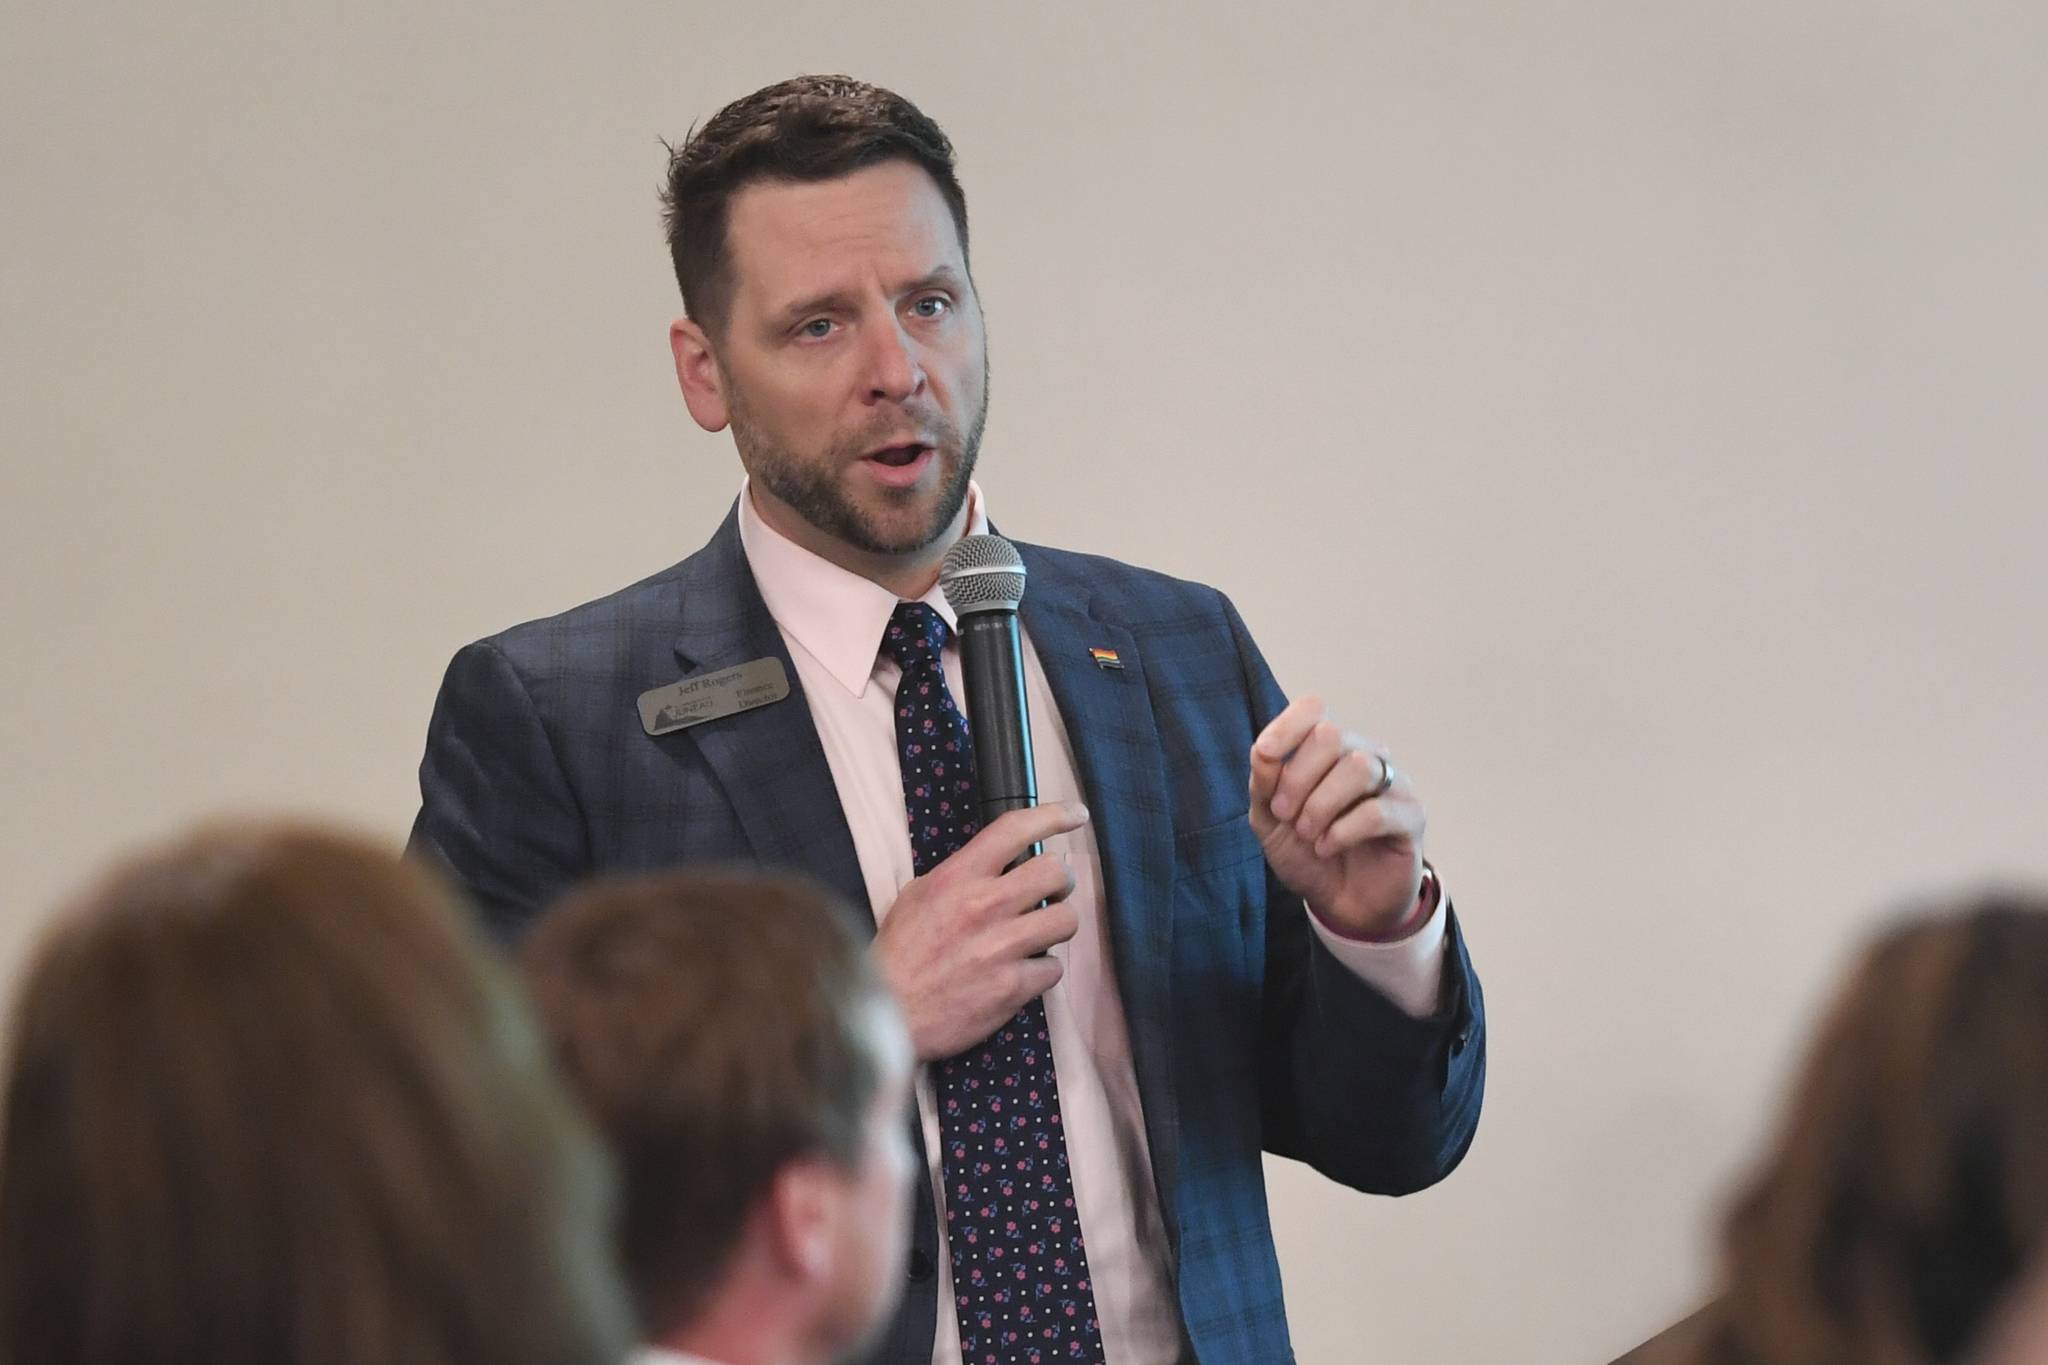 City Finance Director Jeff Rogers speaks to the Juneau Chamber of Commerce about remote taxes being paid to the city during its weekly luncheon at the Moose Lodge on Thursday, Nov. 7, 2019. (Michael Penn | Juneau Empire)